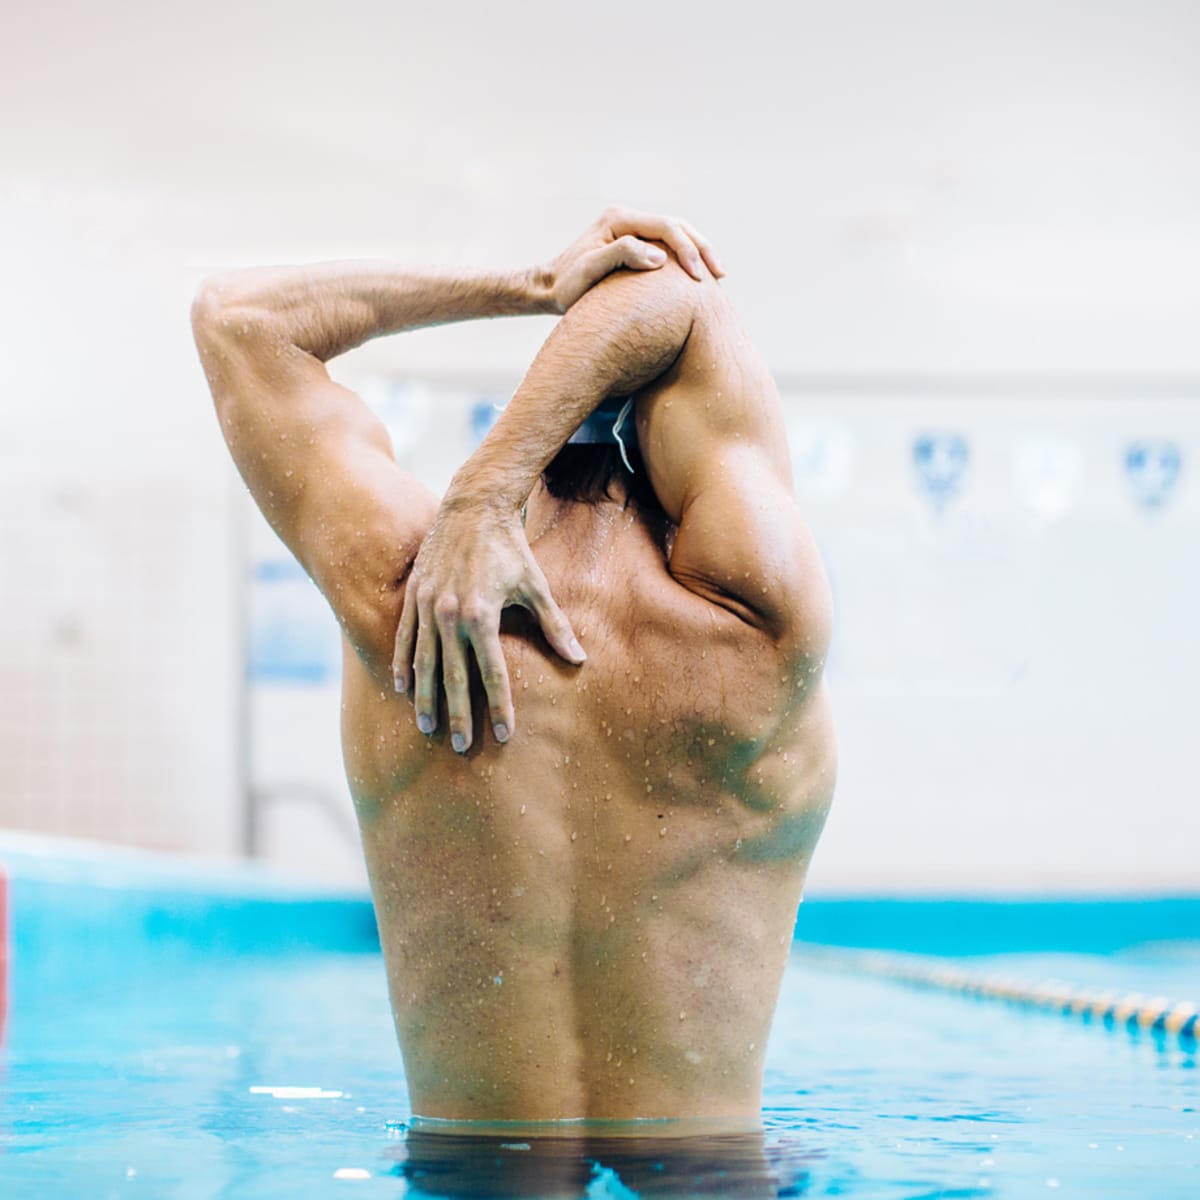 Swimming Workouts: The 5 Best Swimming Drills to Get Jacked